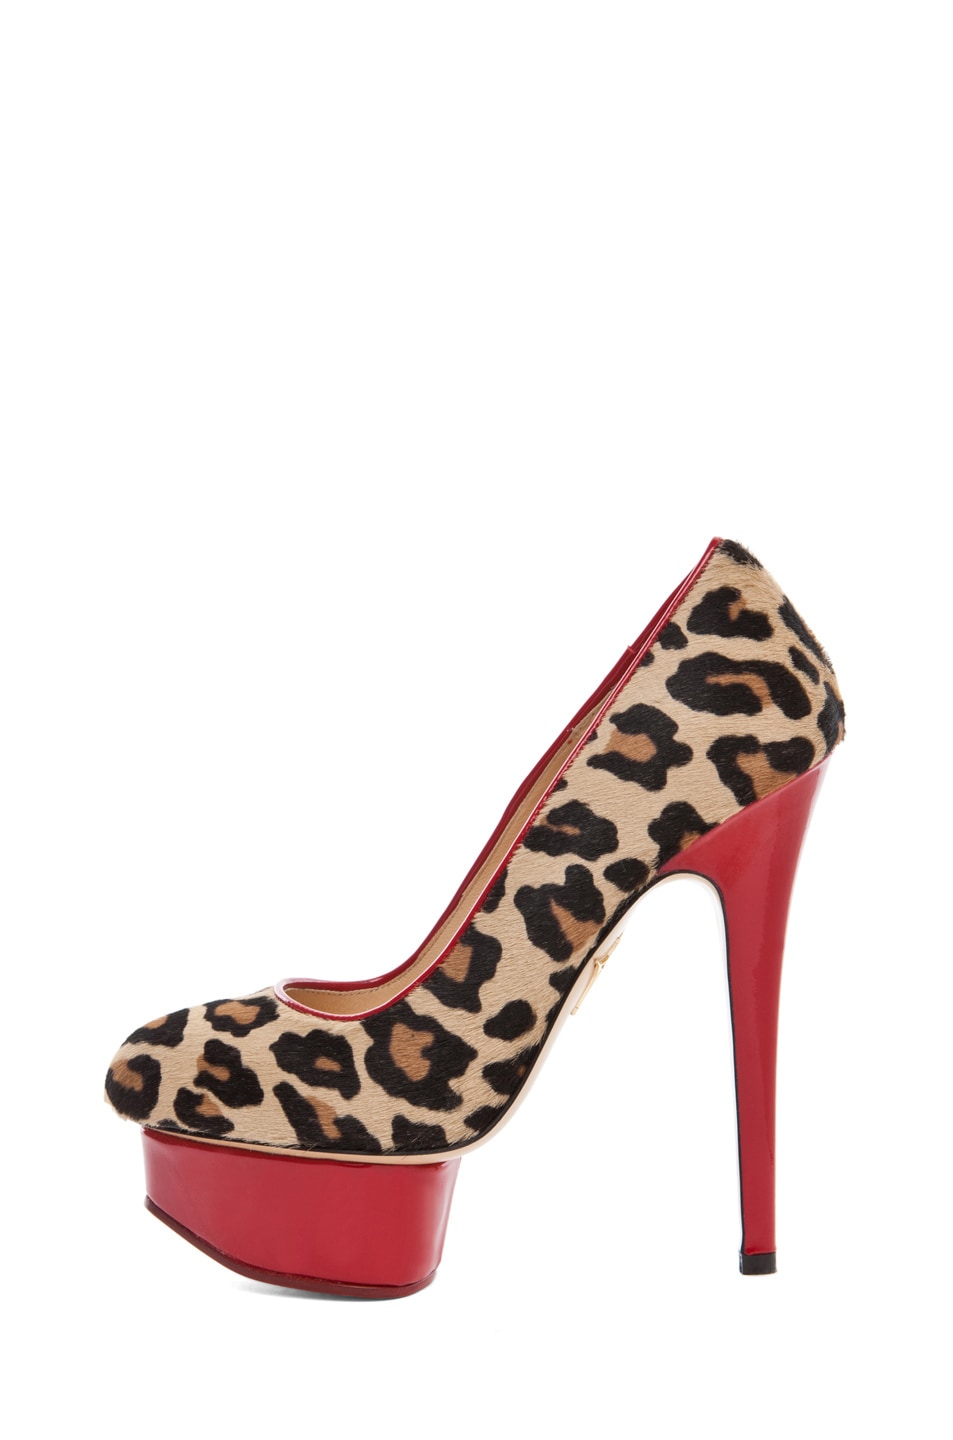 Image 1 of Charlotte Olympia Polly Signature Court Calf Hair Pump in Leopard